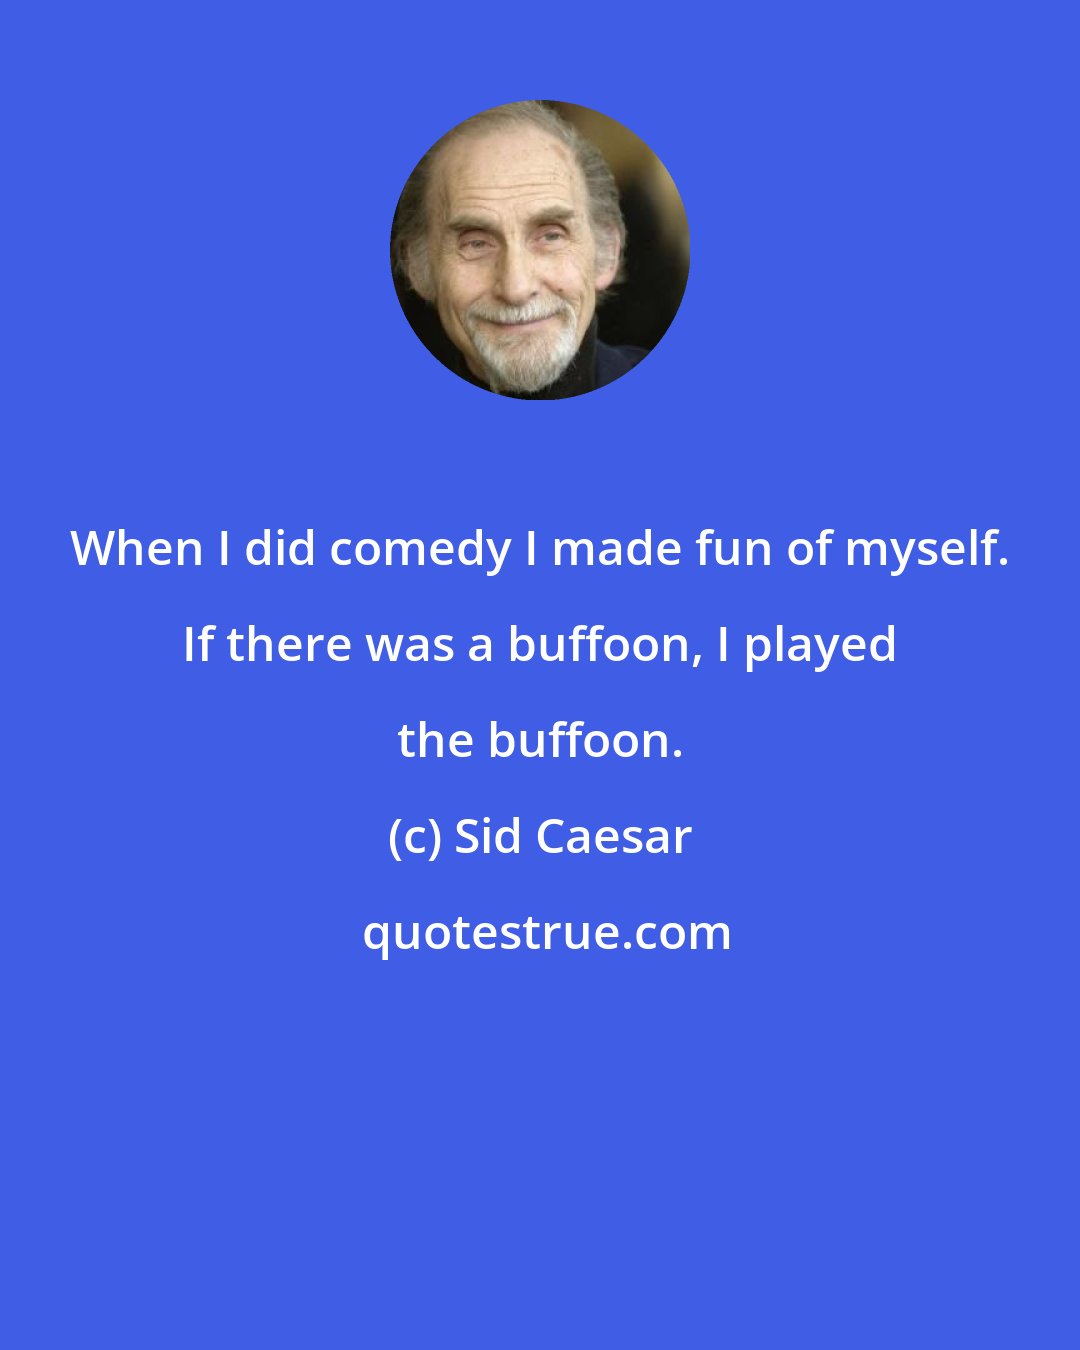 Sid Caesar: When I did comedy I made fun of myself. If there was a buffoon, I played the buffoon.